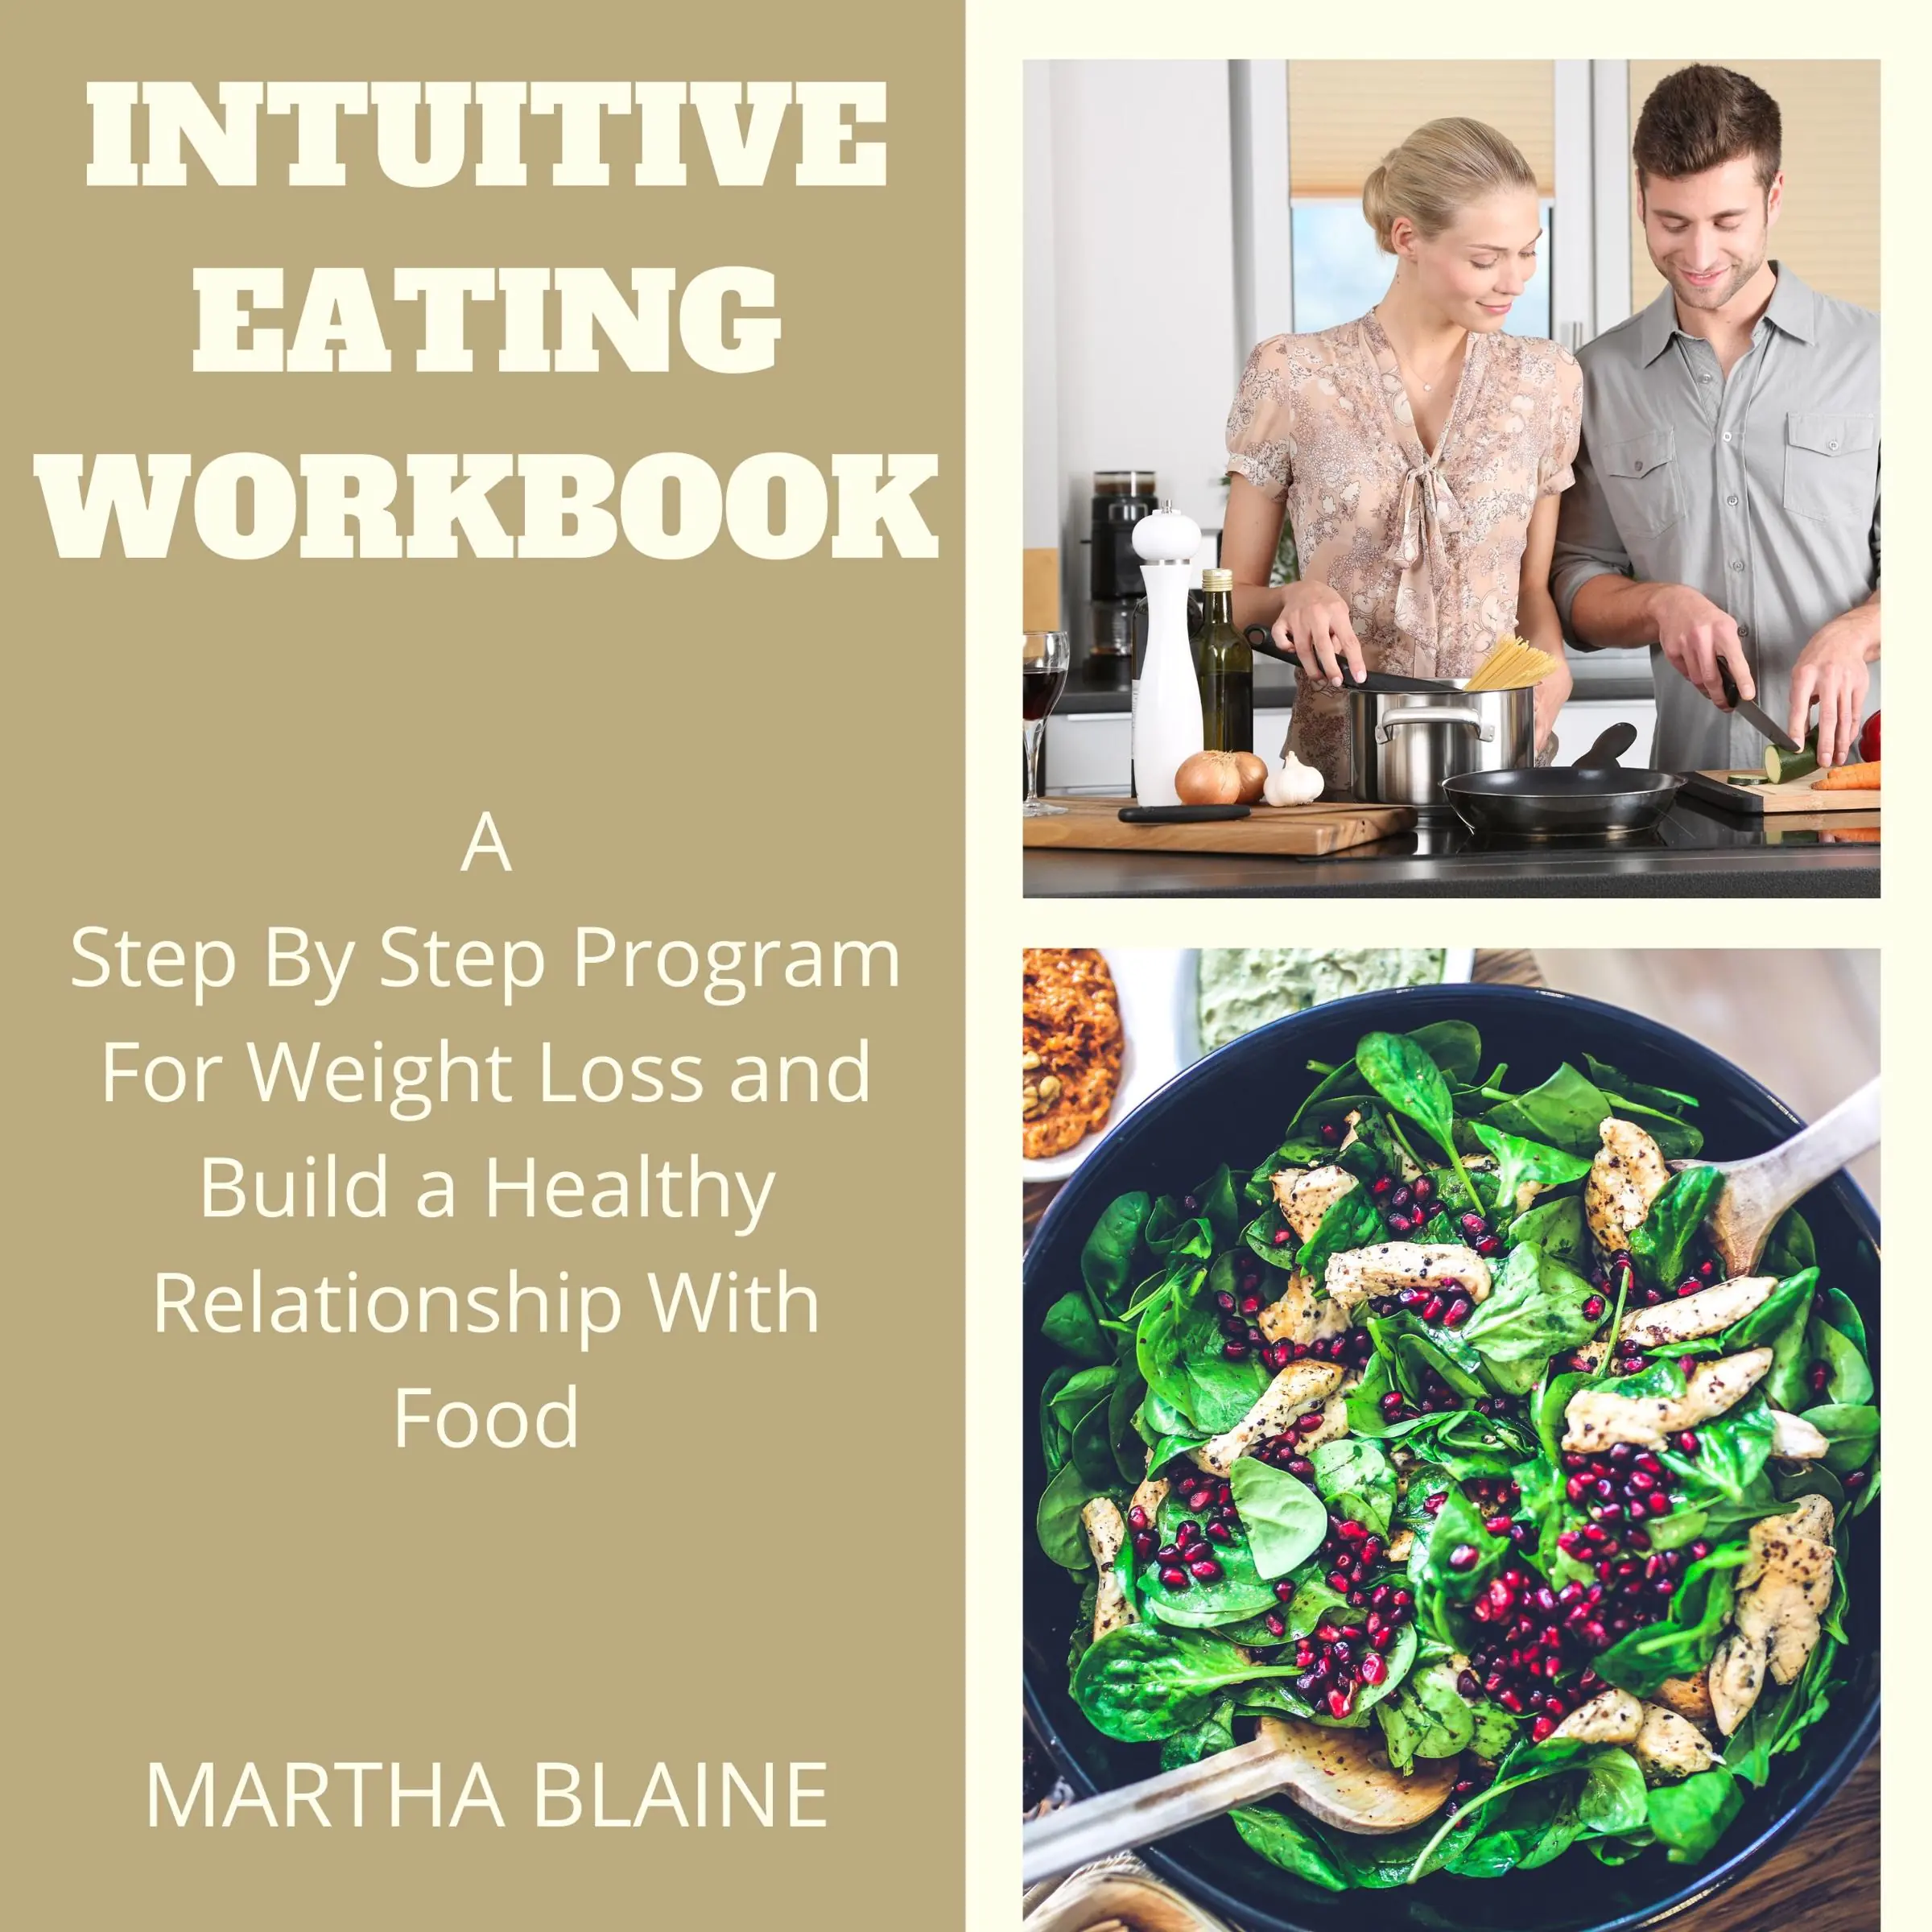 Intuitive Eating Workbook:A Step By Step Program For Weight Loss and Build a Healthy Relationship With Food Audiobook by Martha Blaine